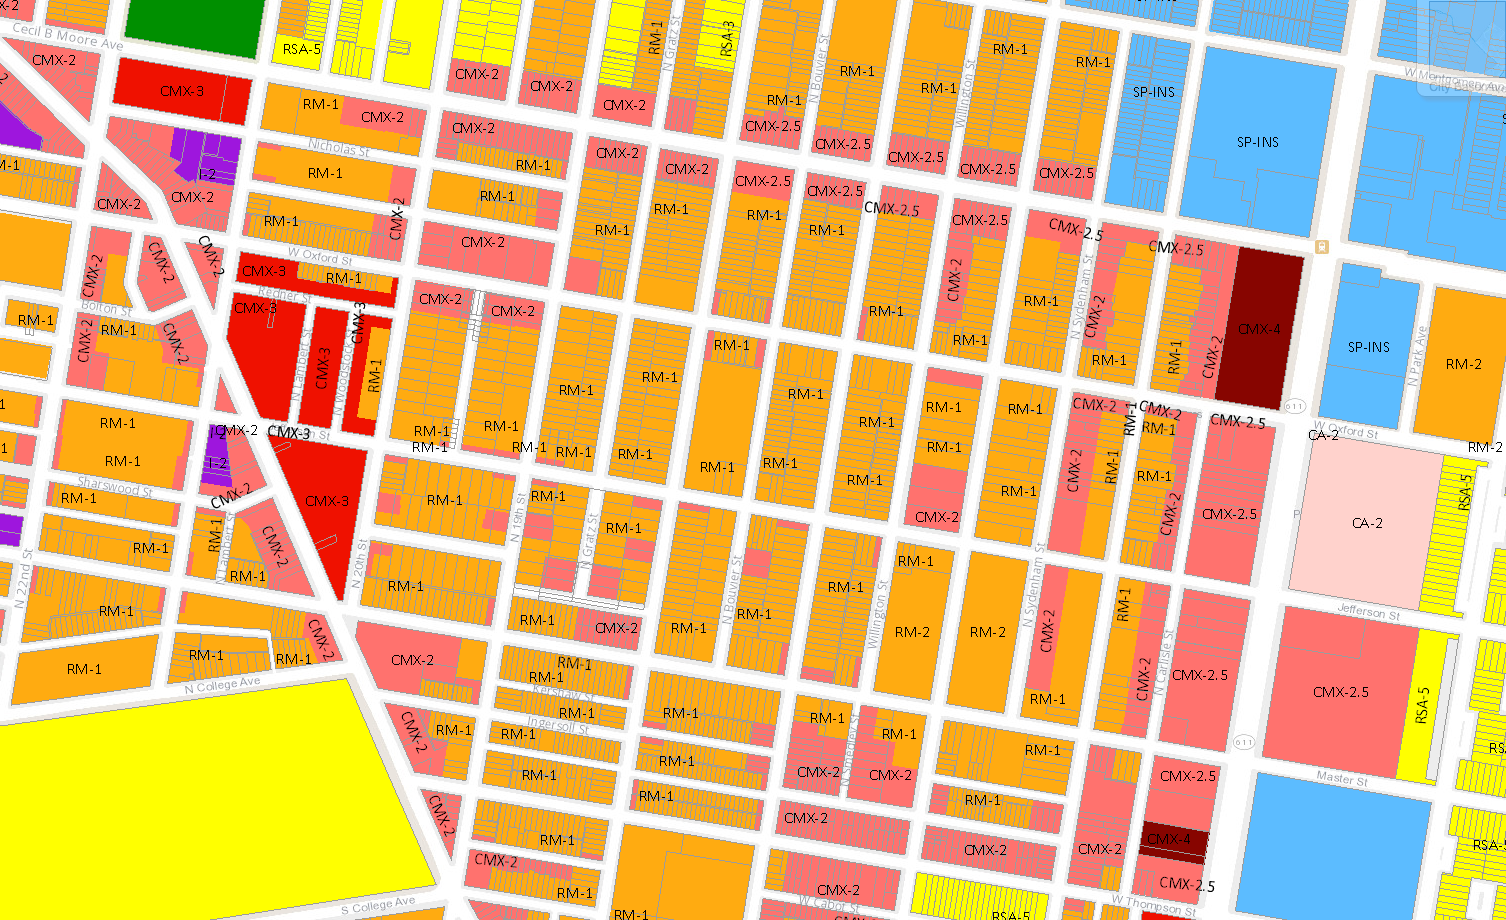 Zoning map detail showing CMX 2.5 and CMX 2 zones in North Philadelphia